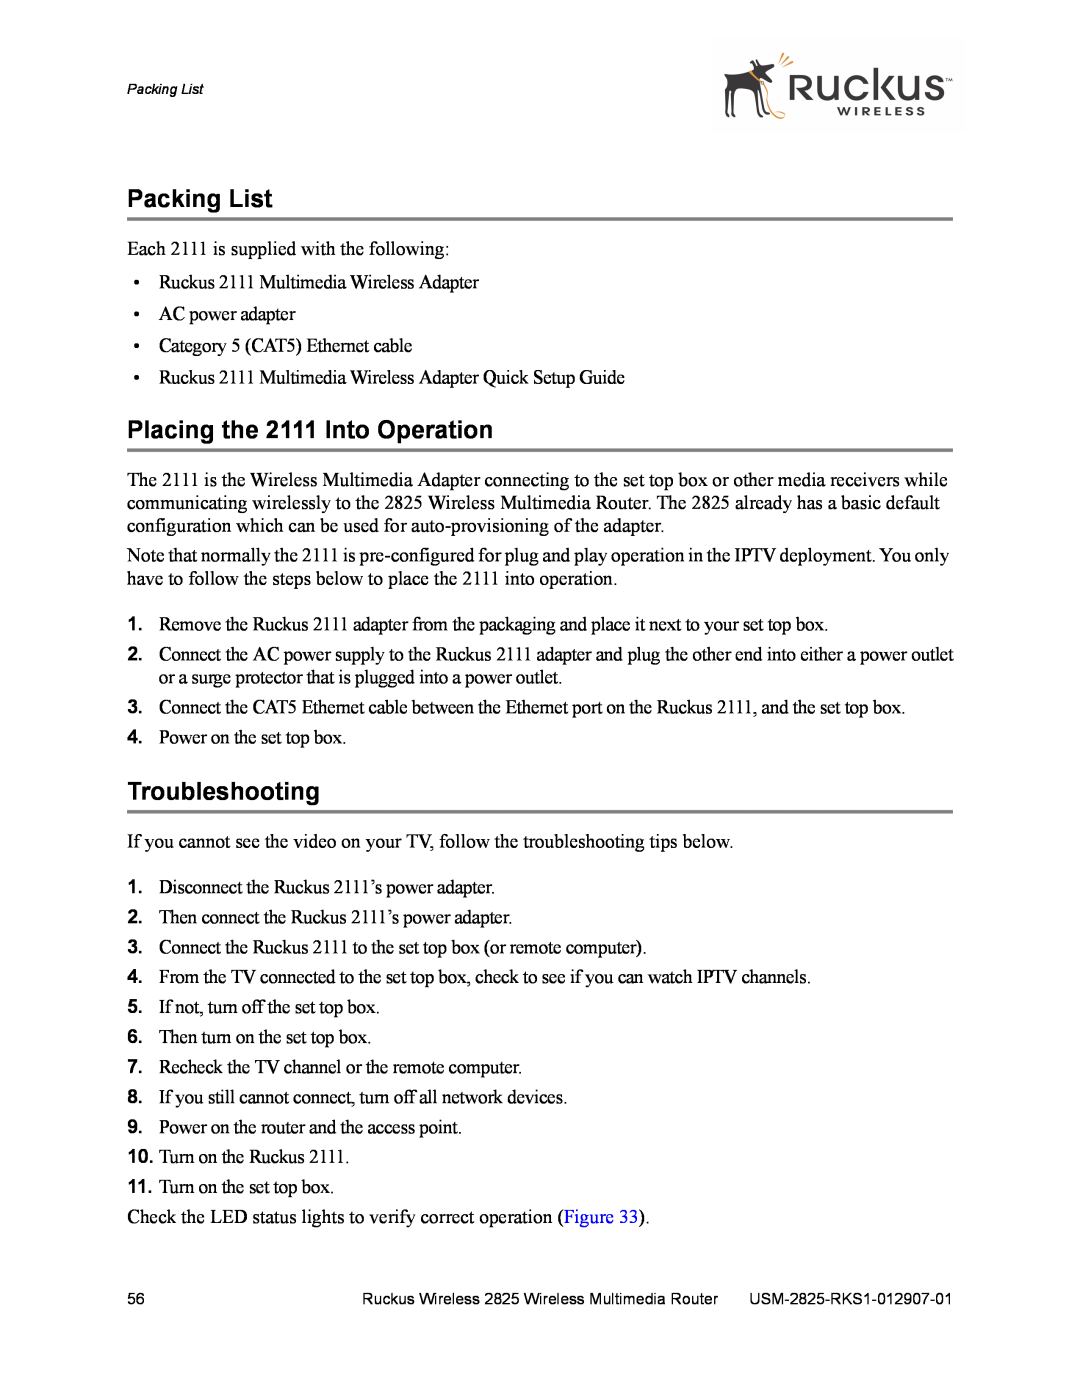 Ruckus Wireless 2825 manual Placing the 2111 Into Operation, Packing List, Troubleshooting 